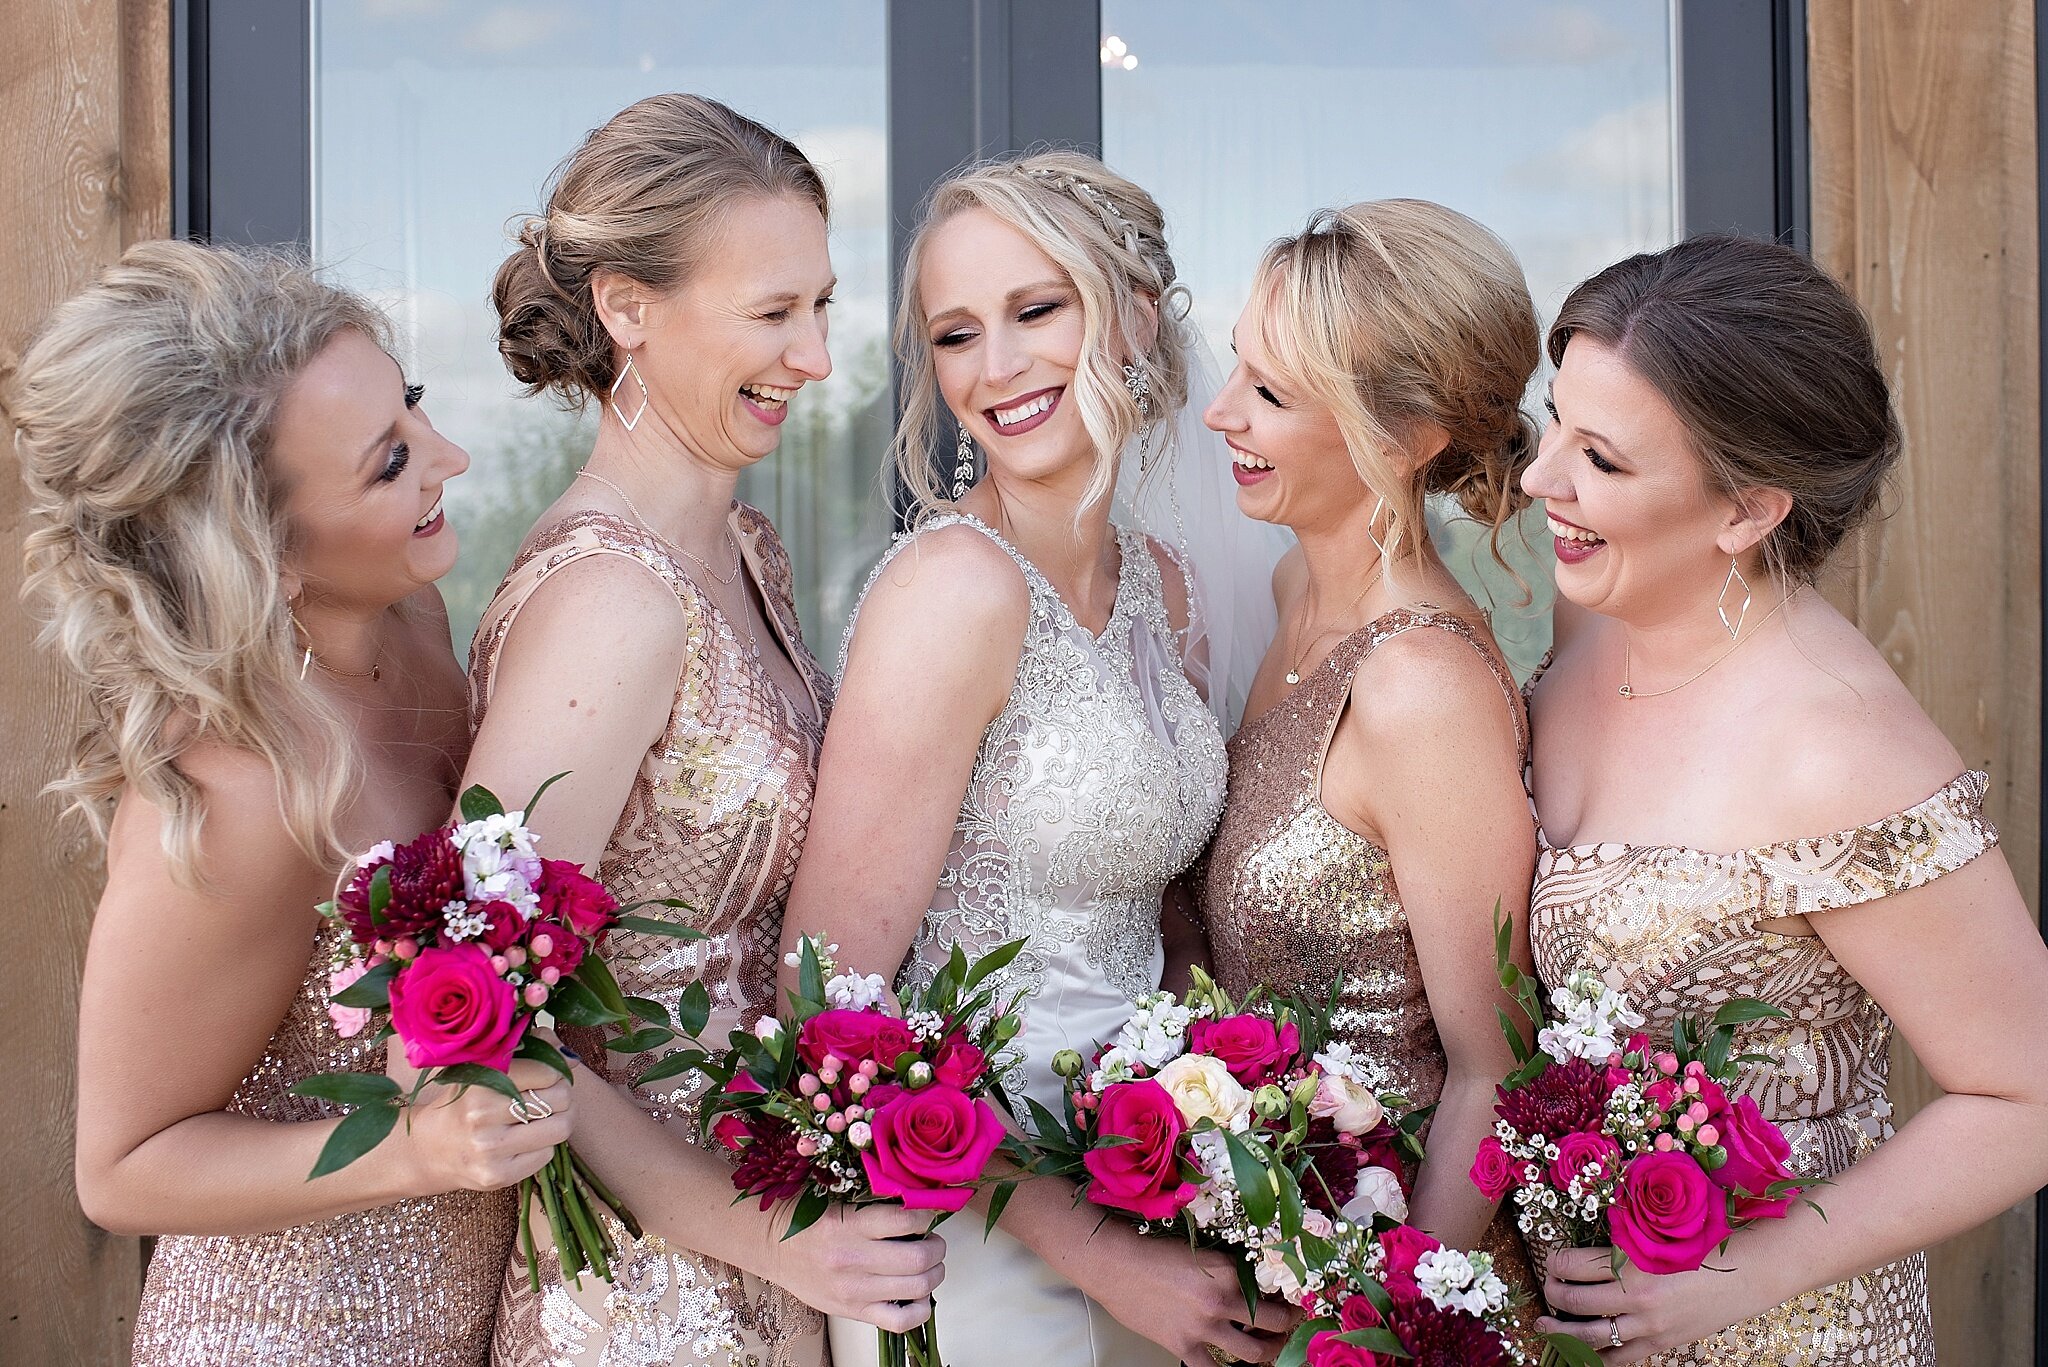 magenta blush and white bridal bouquet with coordinating bridesmaids bouquets